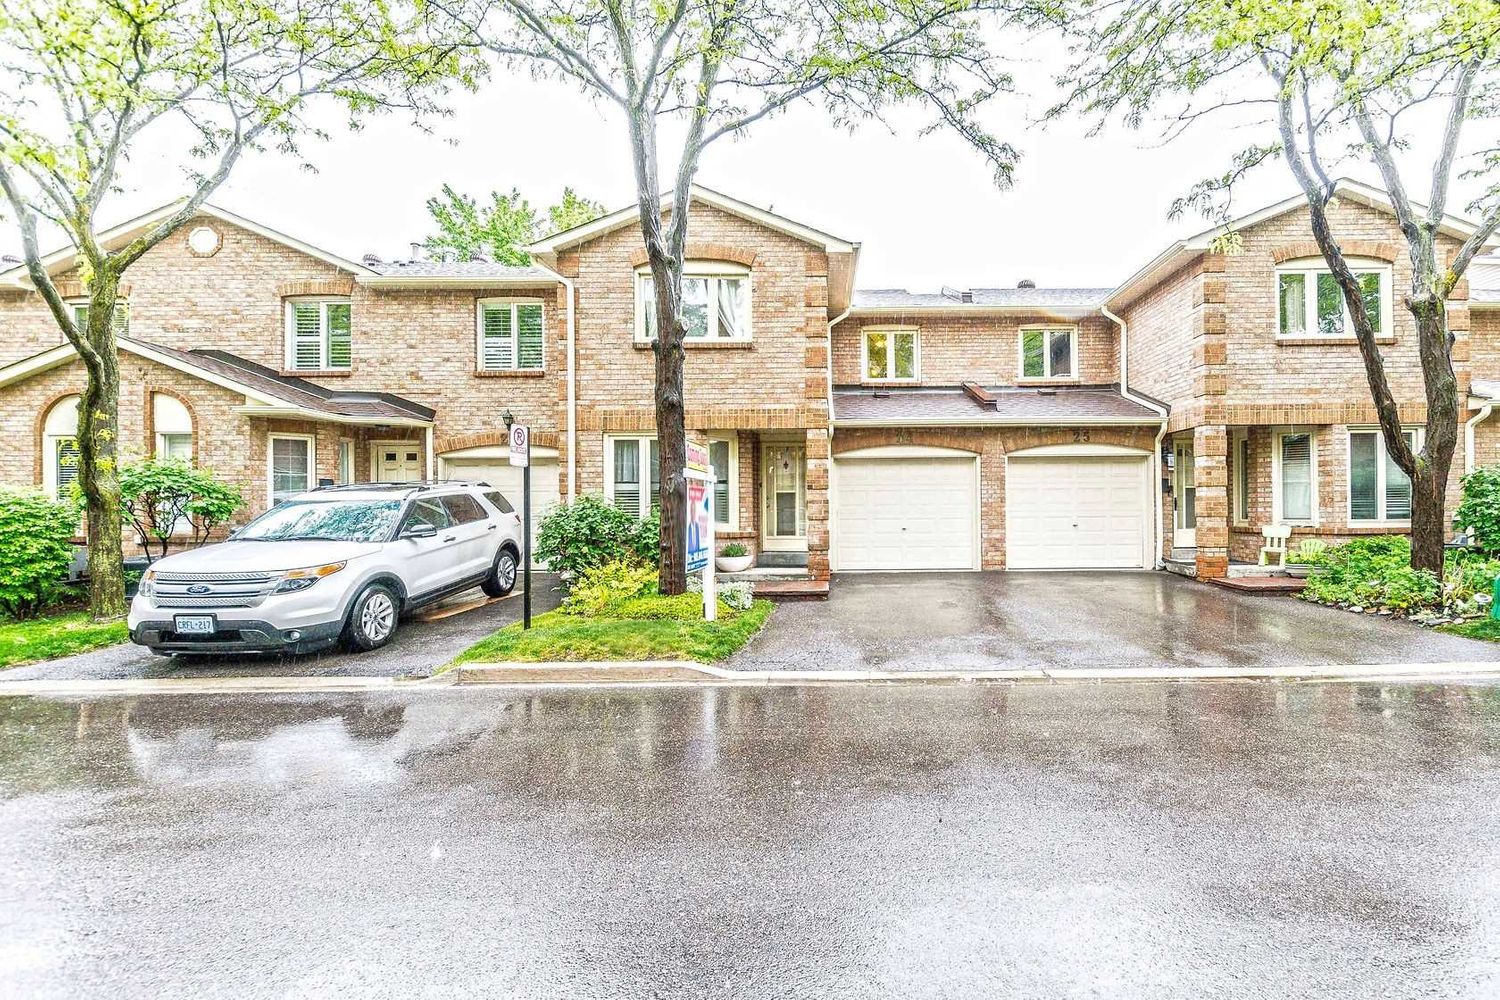 5020 Delaware Drive. 5020 Delaware Drive Townhomes is located in  Mississauga, Toronto - image #2 of 2